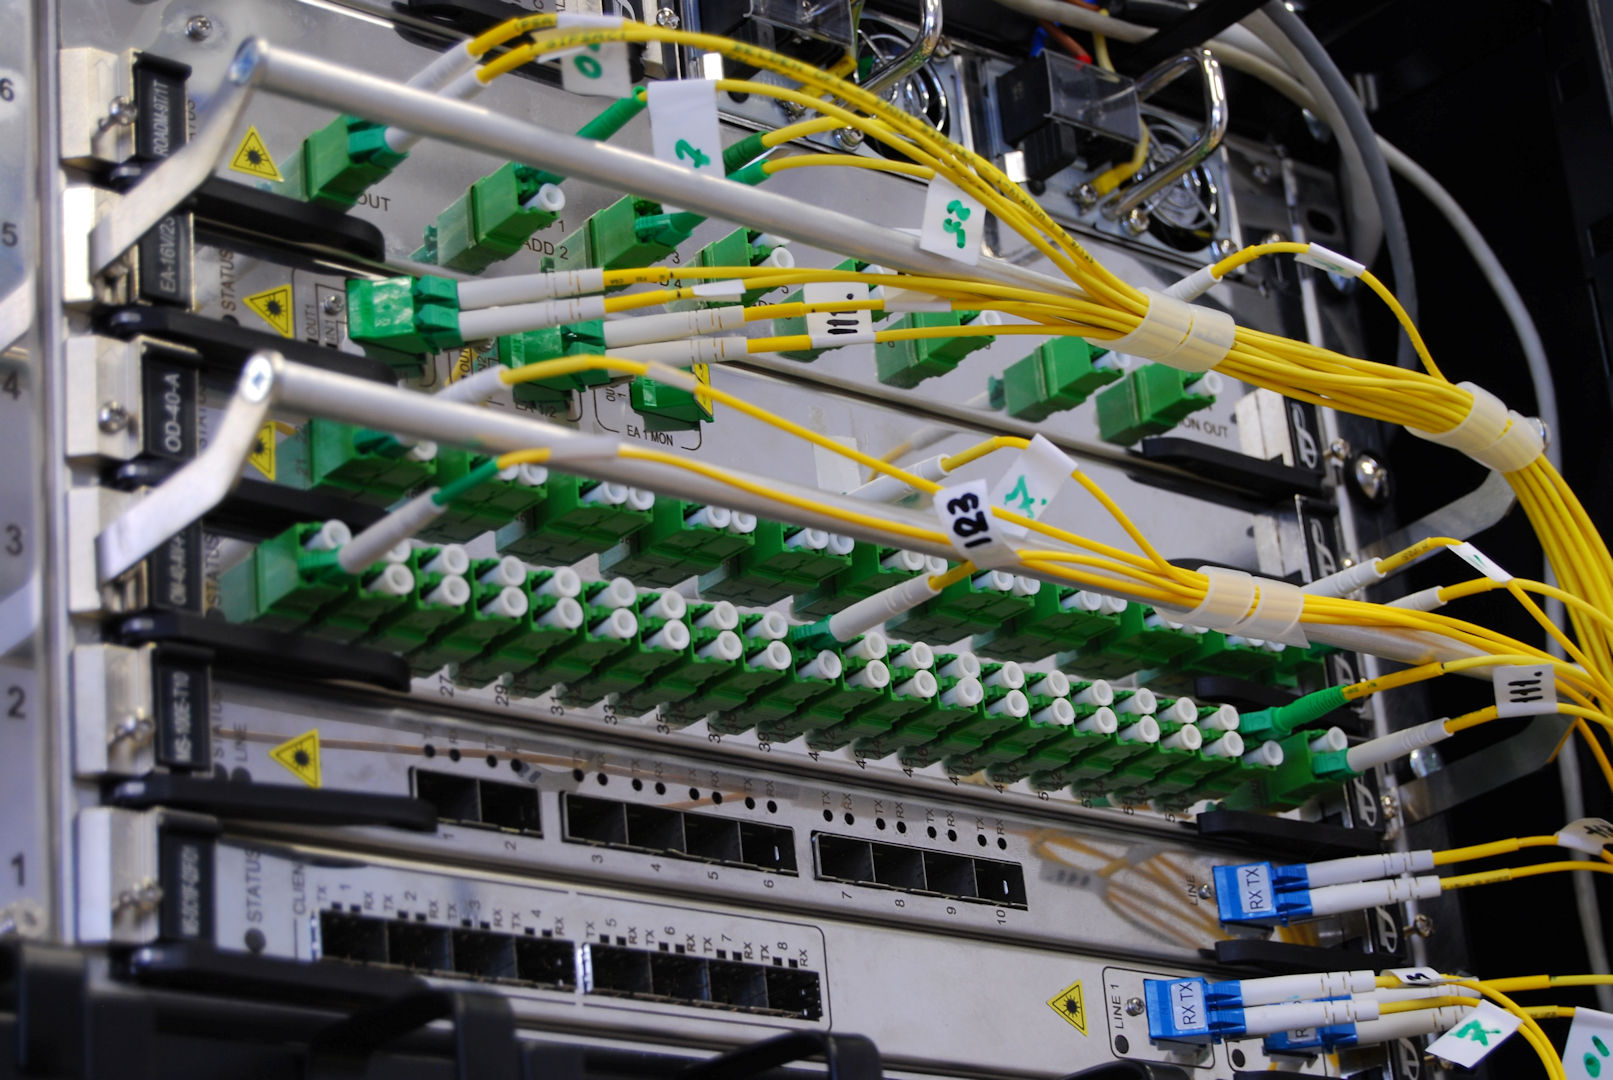 microngroup-fibre-optic-patch-panel-and-network-gigabit-switch